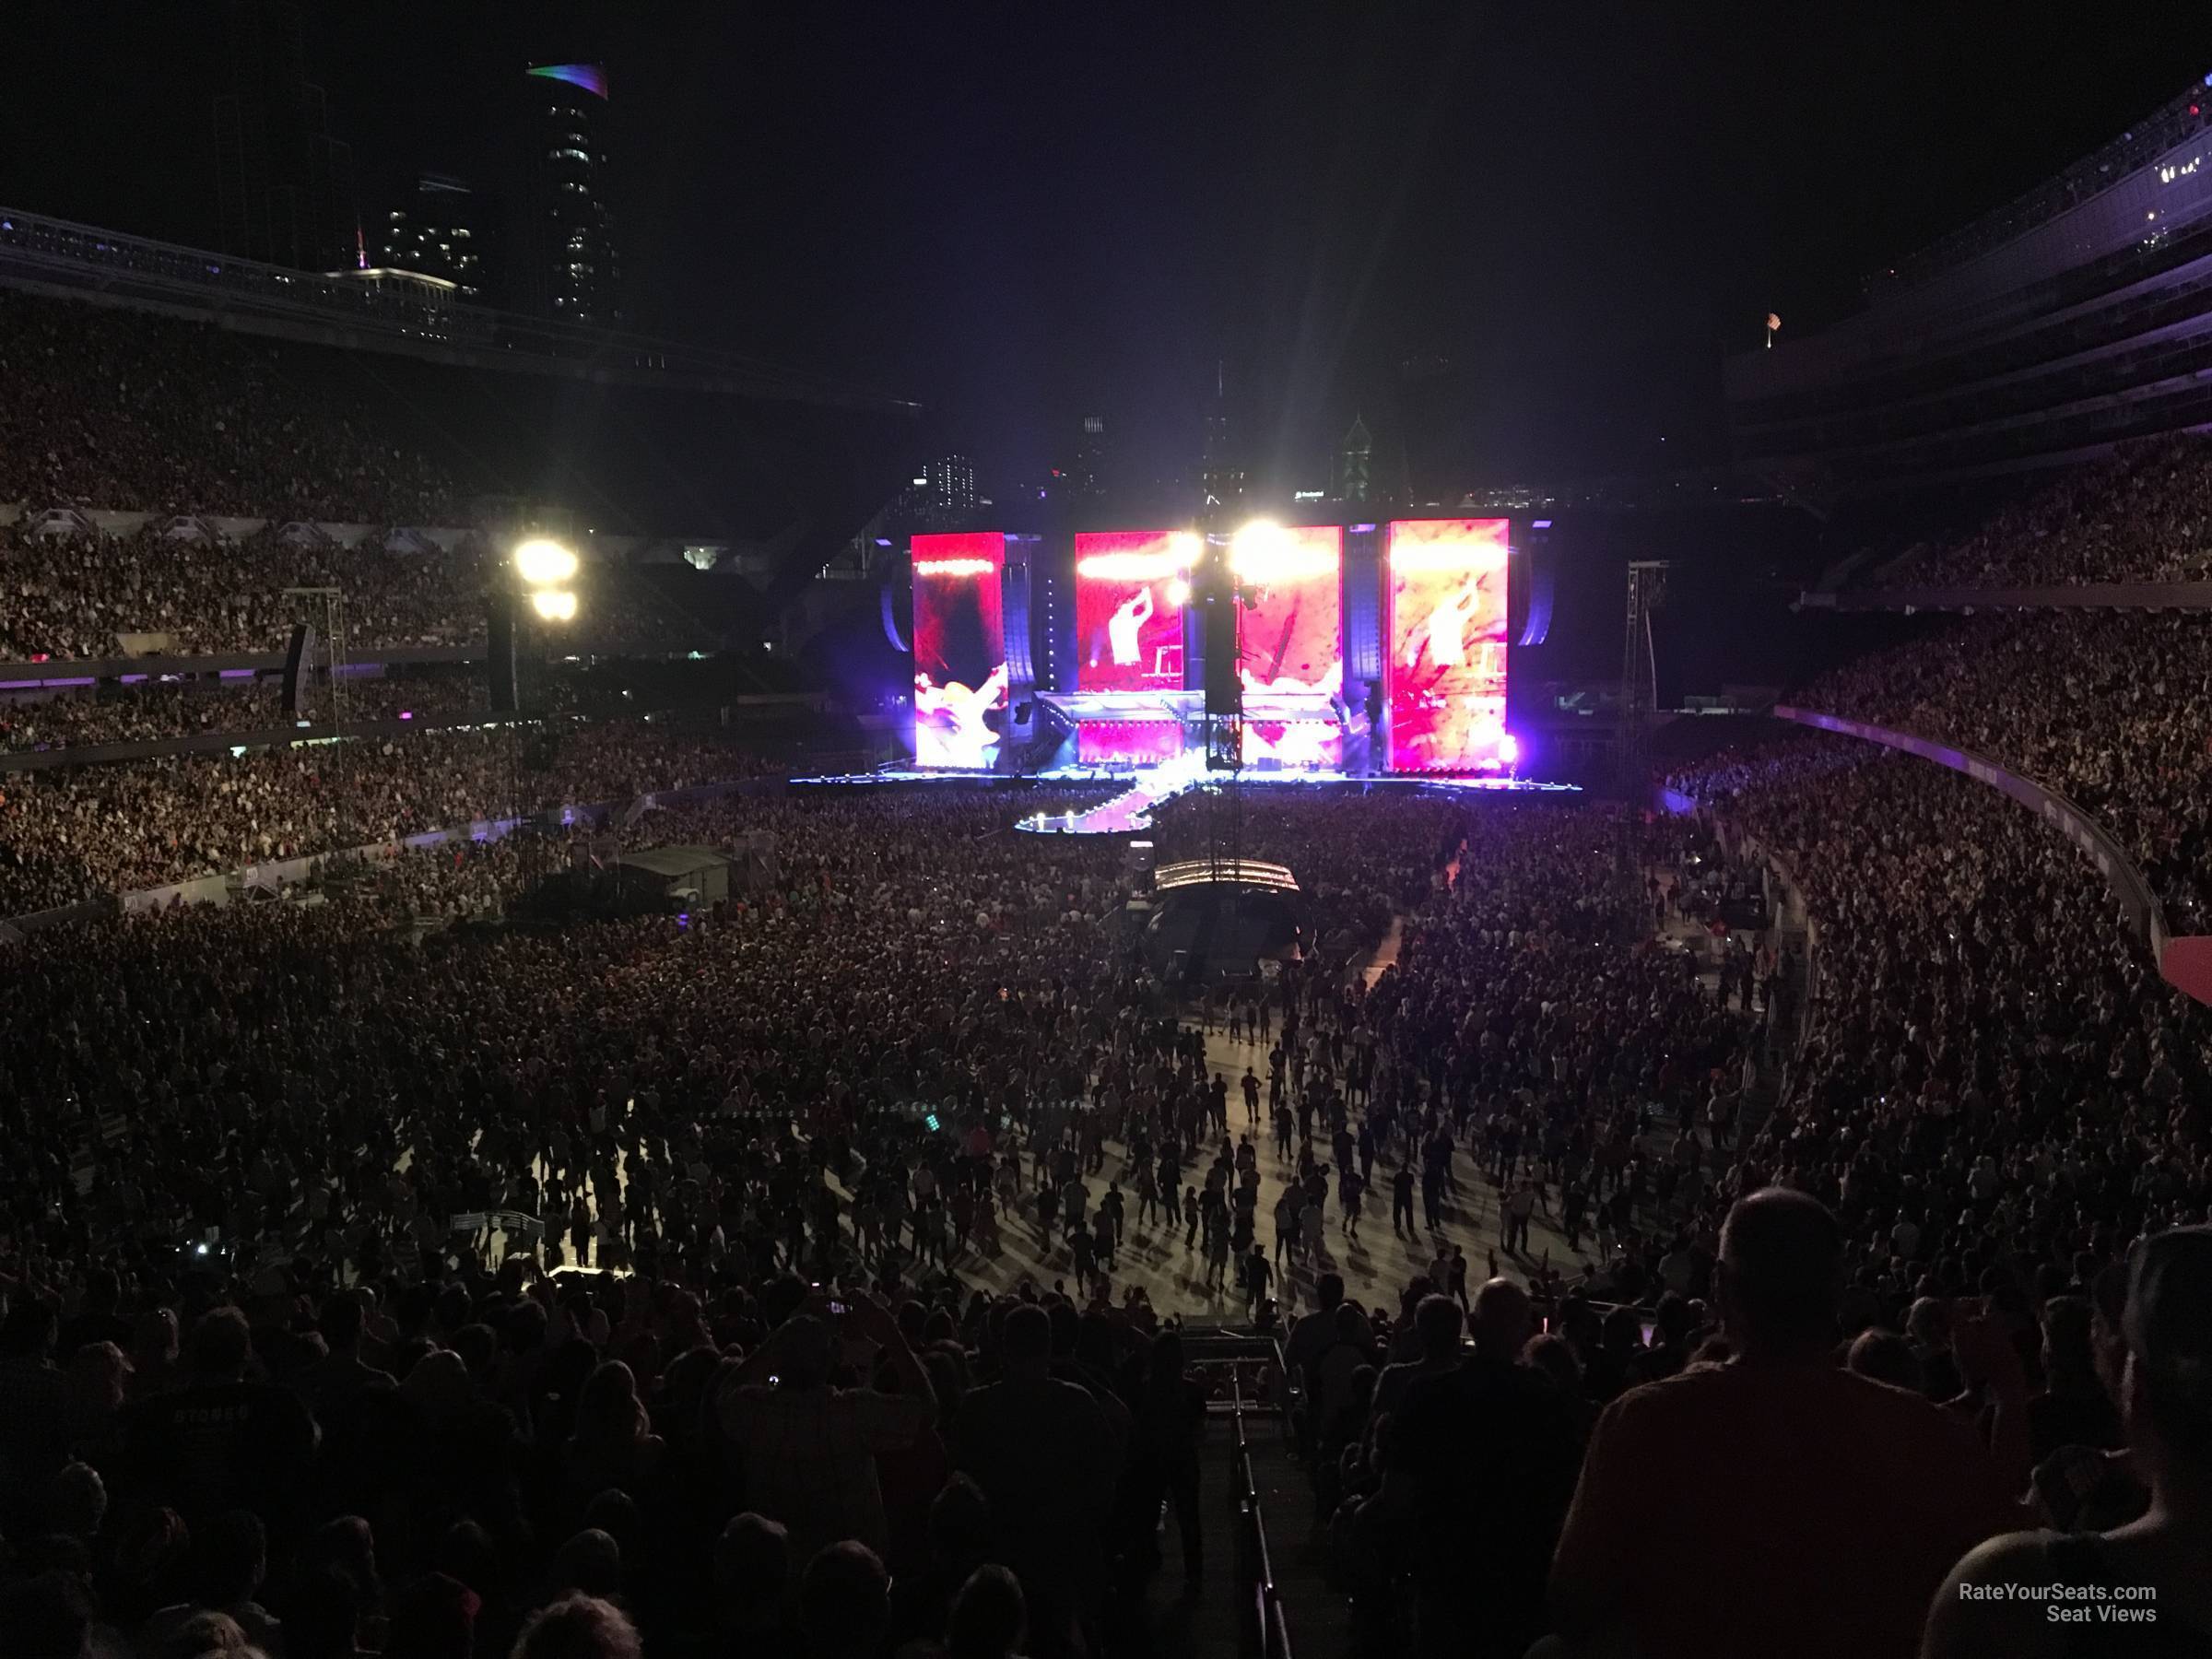 section 220, row 22 seat view  for concert - soldier field